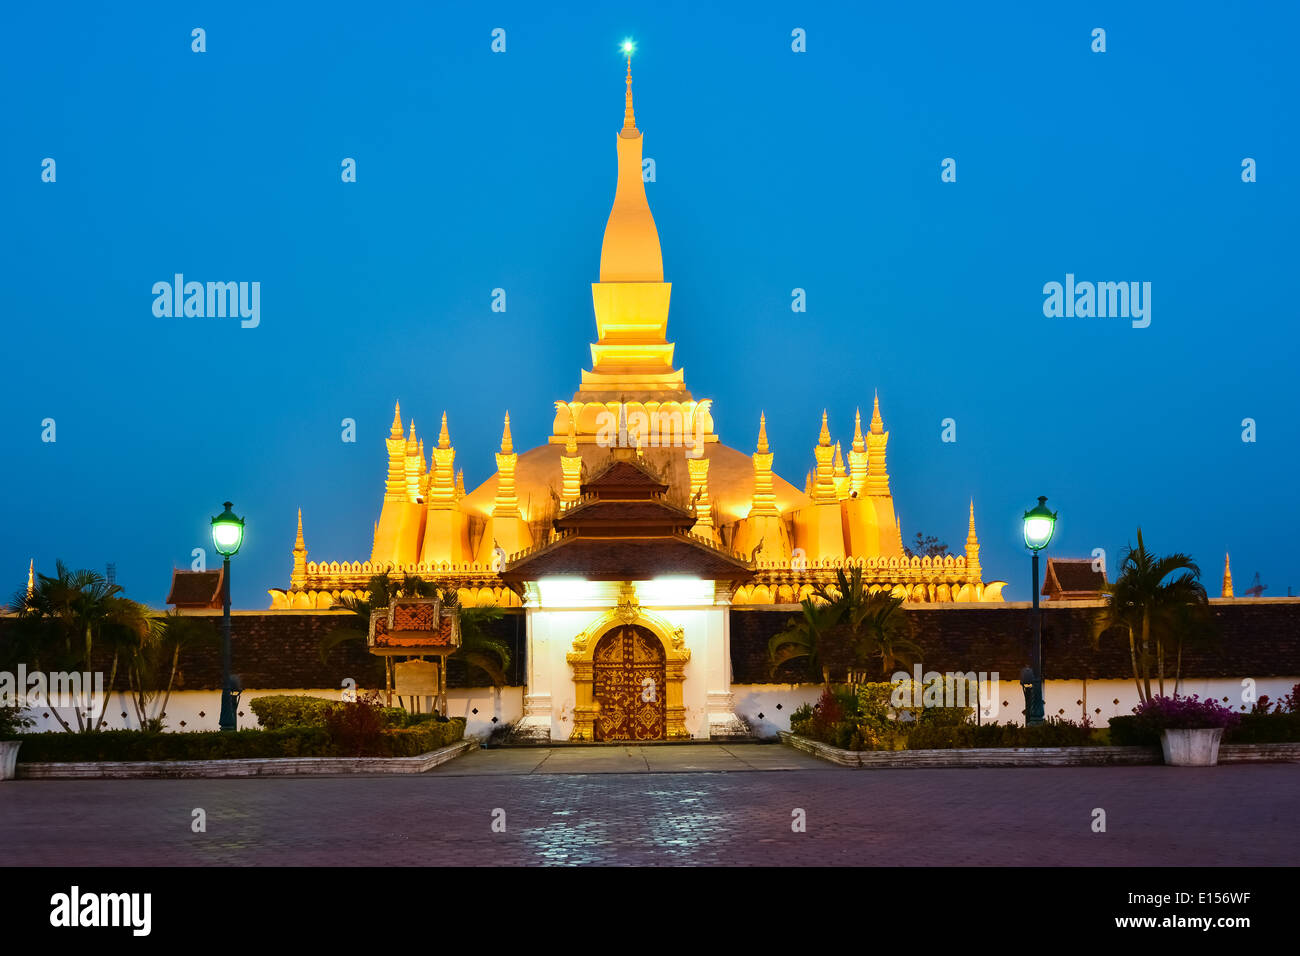 Pha That Luang, 'Great Stupa' is a gold-covered large Buddhist stupa in the centre of Vientiane, Laos Stock Photo